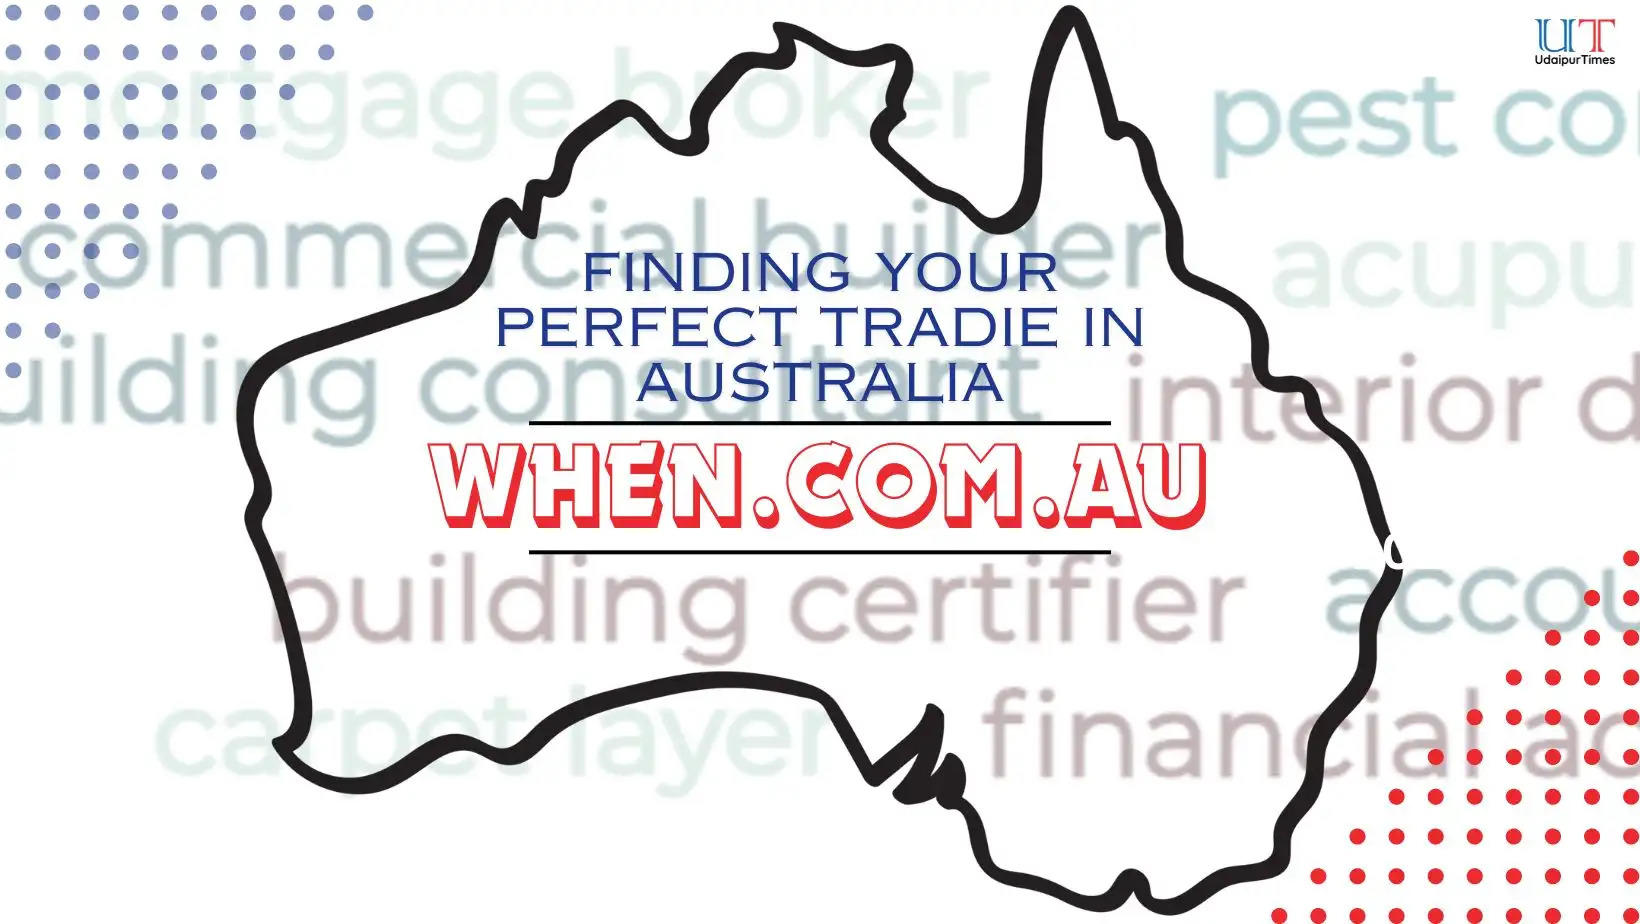 Finding your perfect service supplier in Australia, Finding your perfect tradie in Australia